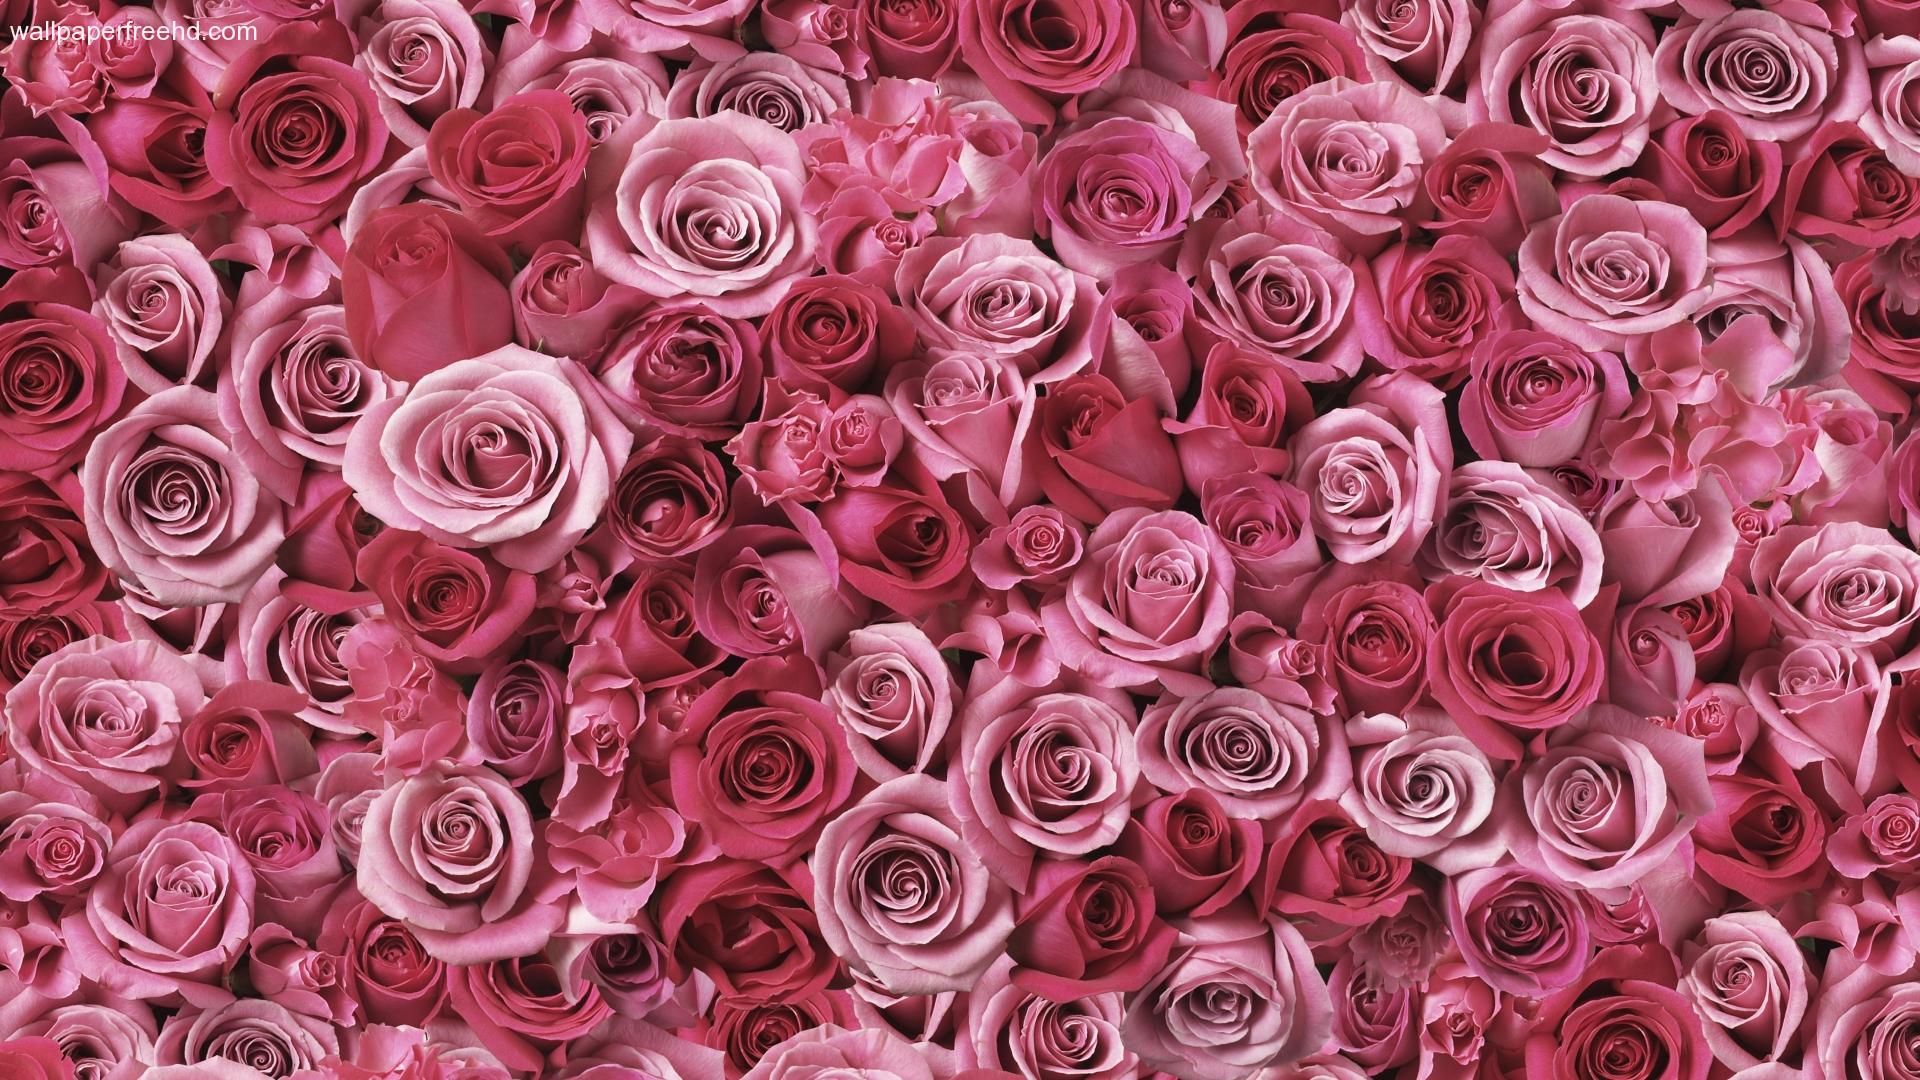 Roses Tumblr Backgrounds | Onlybackground